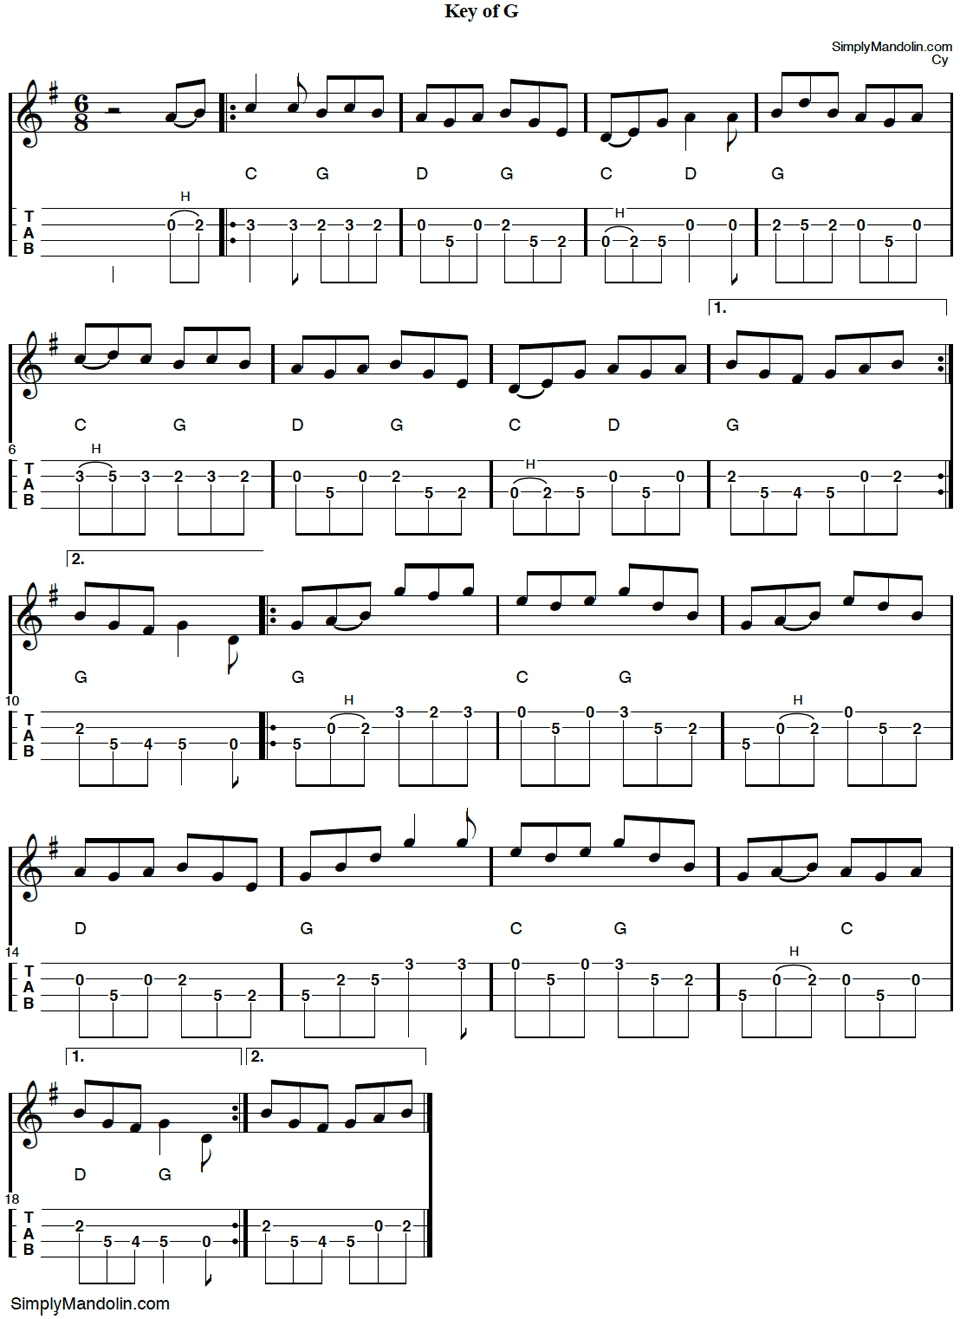 image of music and tab for "the maid in the meadow".